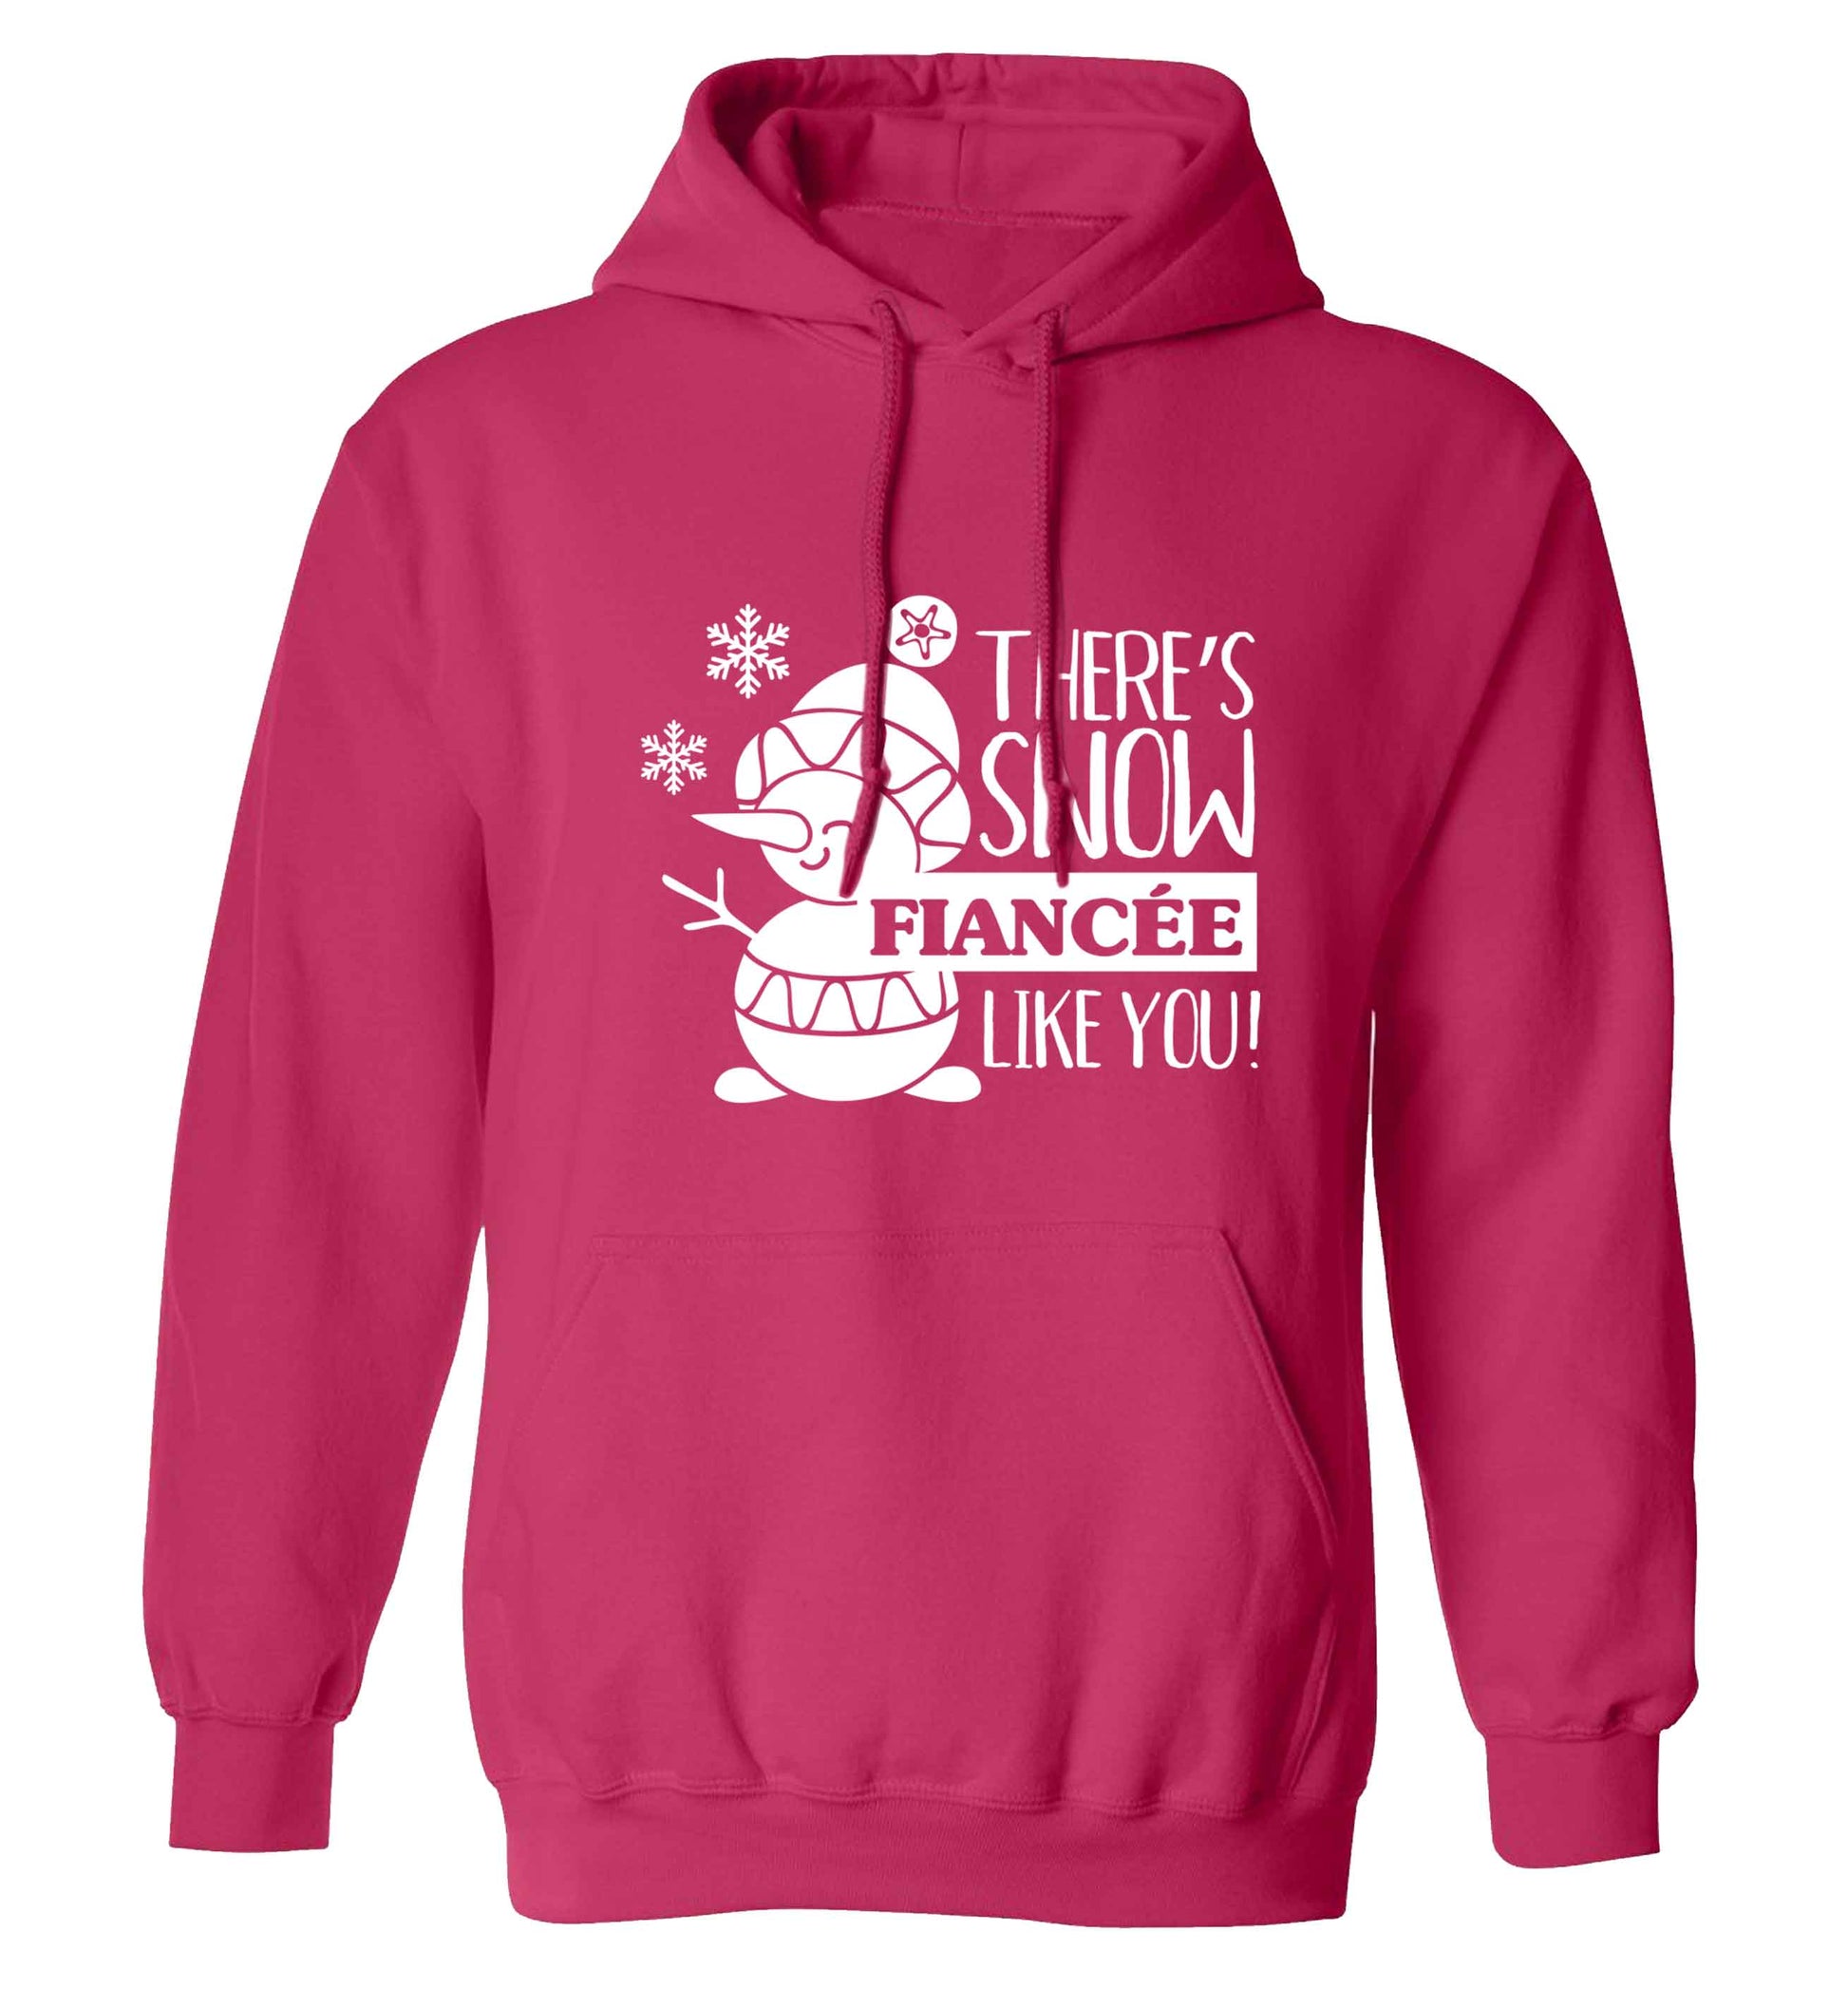 There's snow fiancee like you adults unisex pink hoodie 2XL